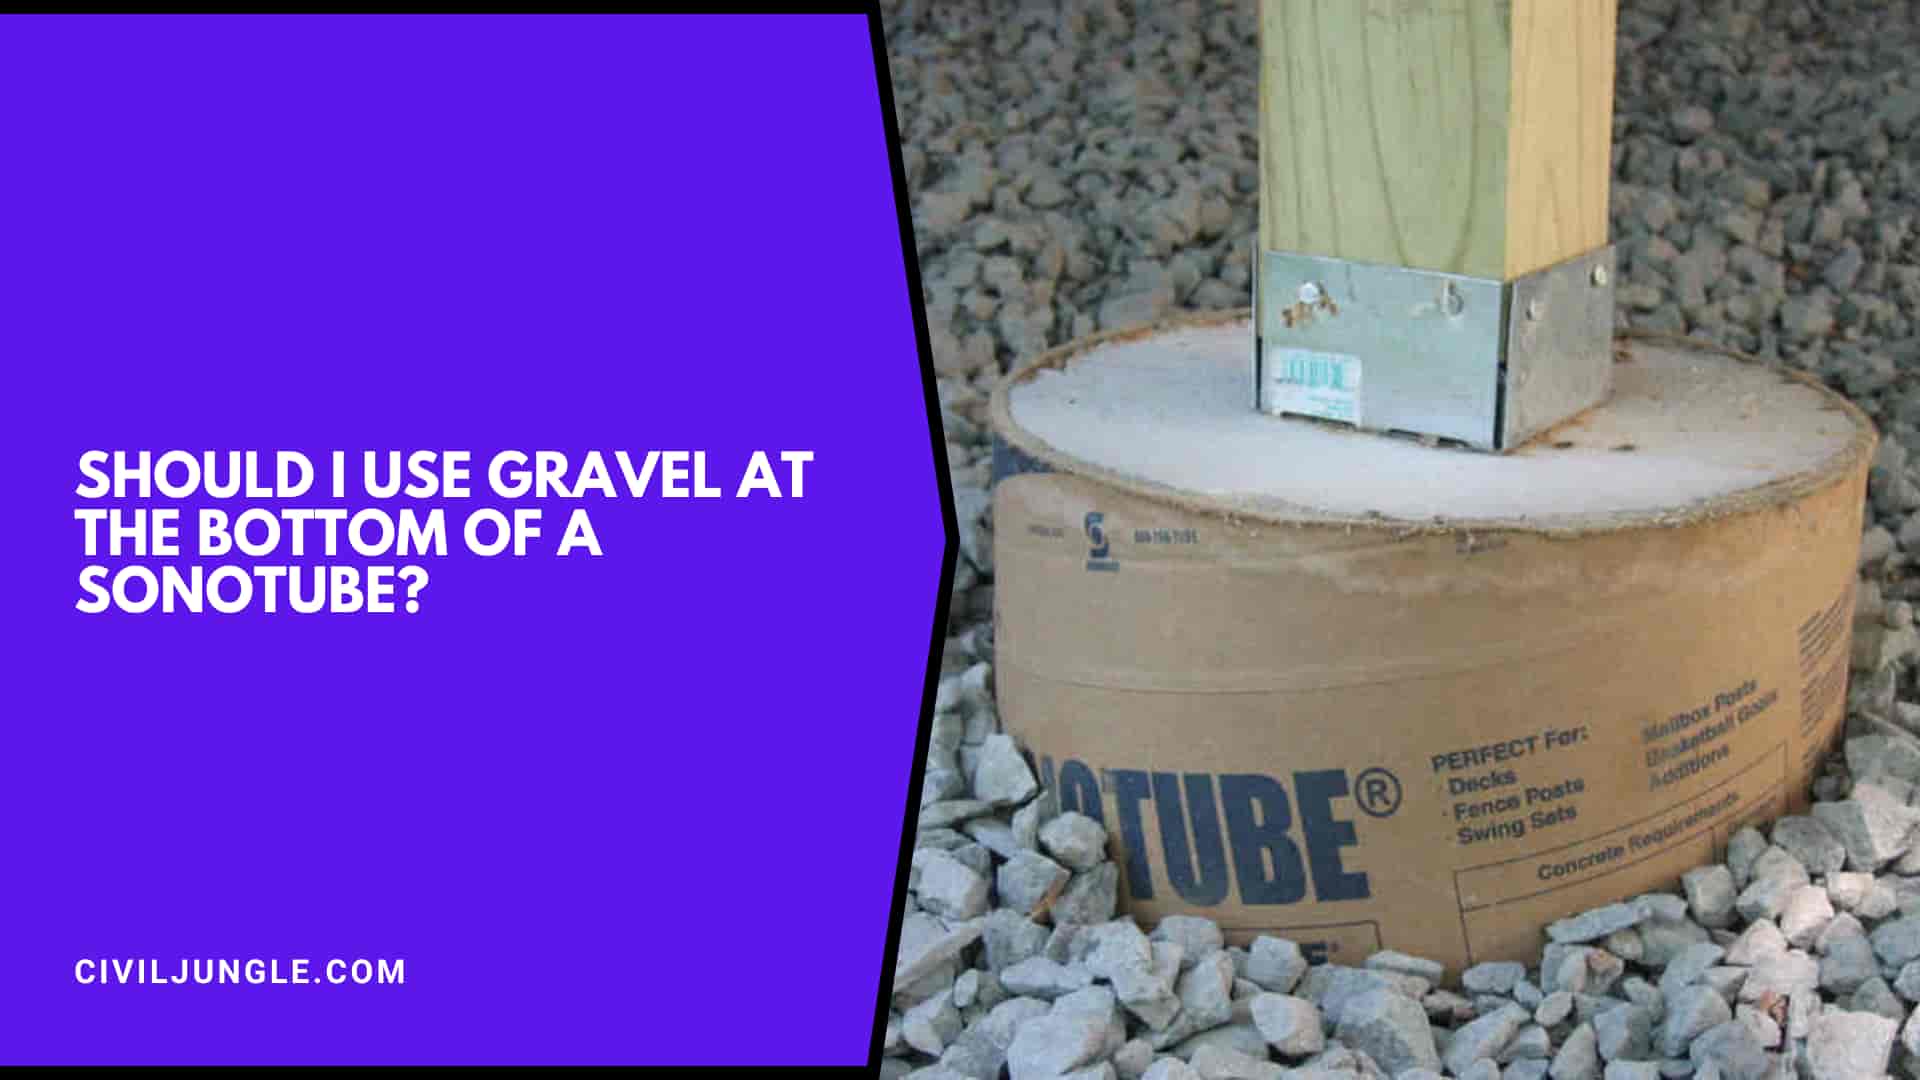 Should I Use Gravel At The Bottom Of A Sonotube?